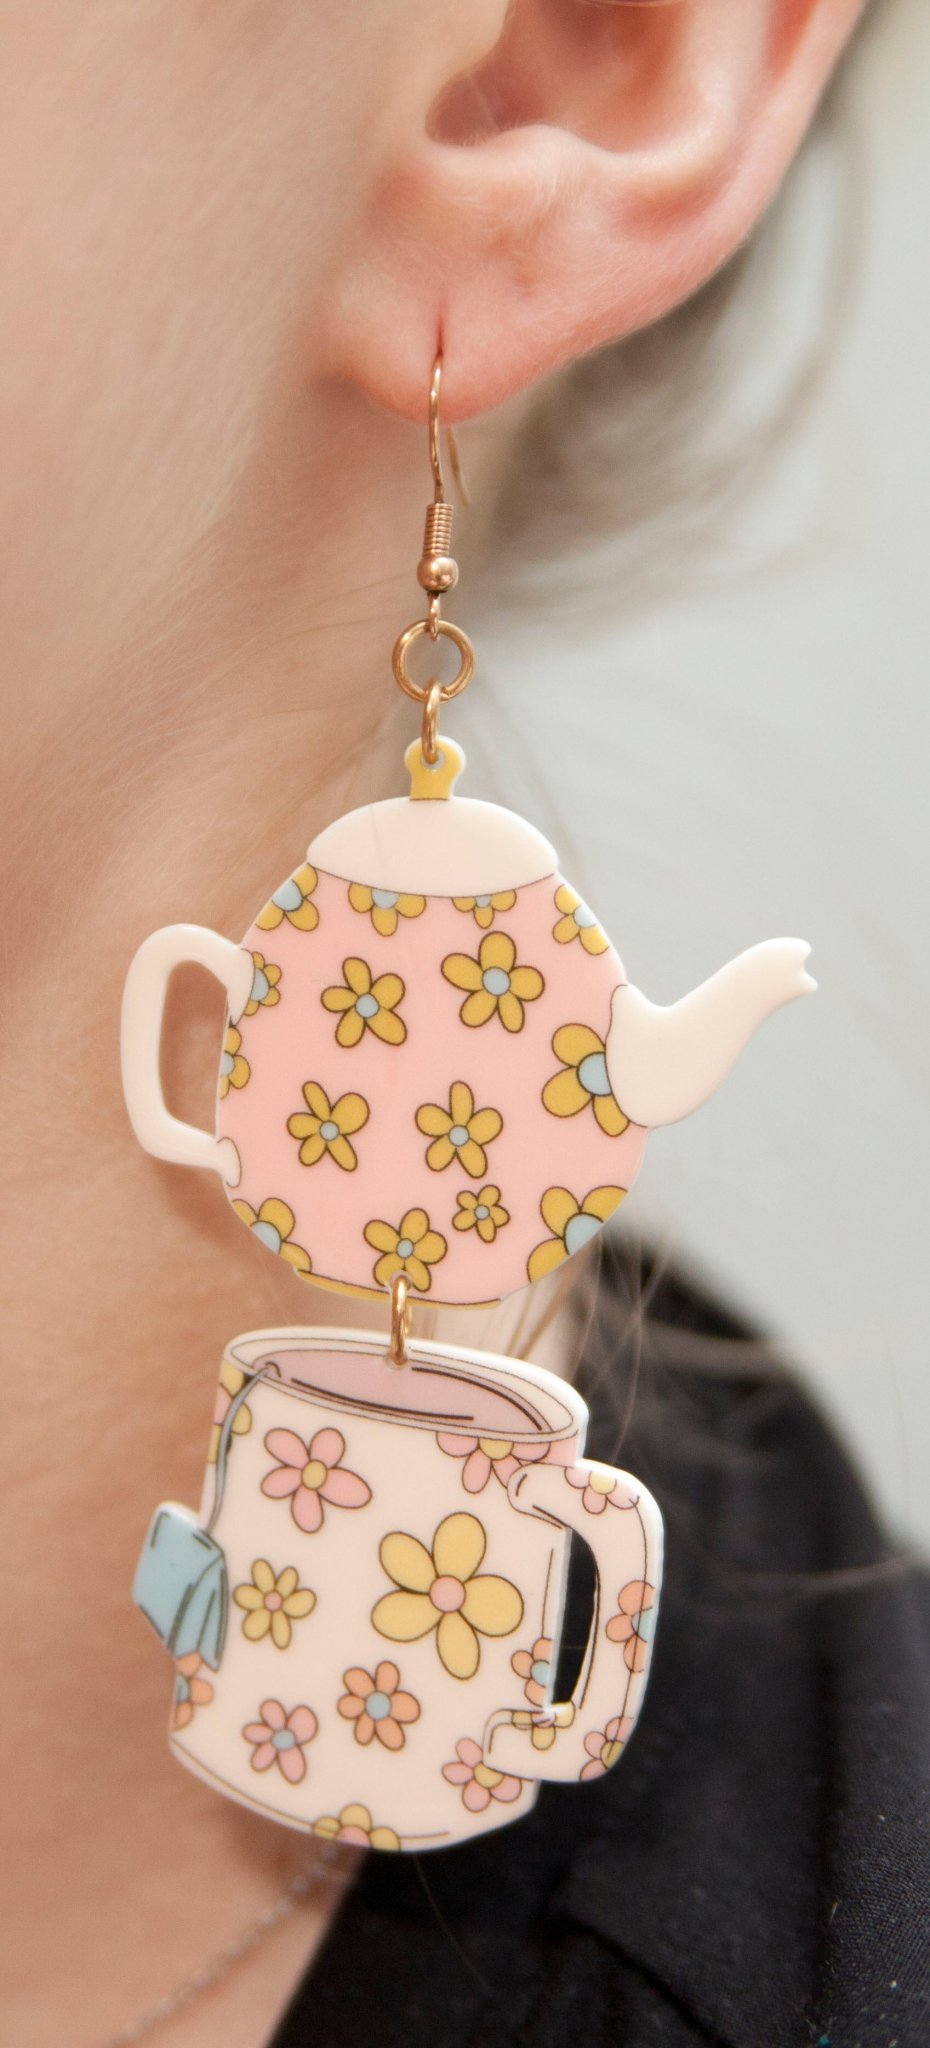 Spot of Tea Flower Teapot and Teacup Groovy 60s Earrings - Relic828